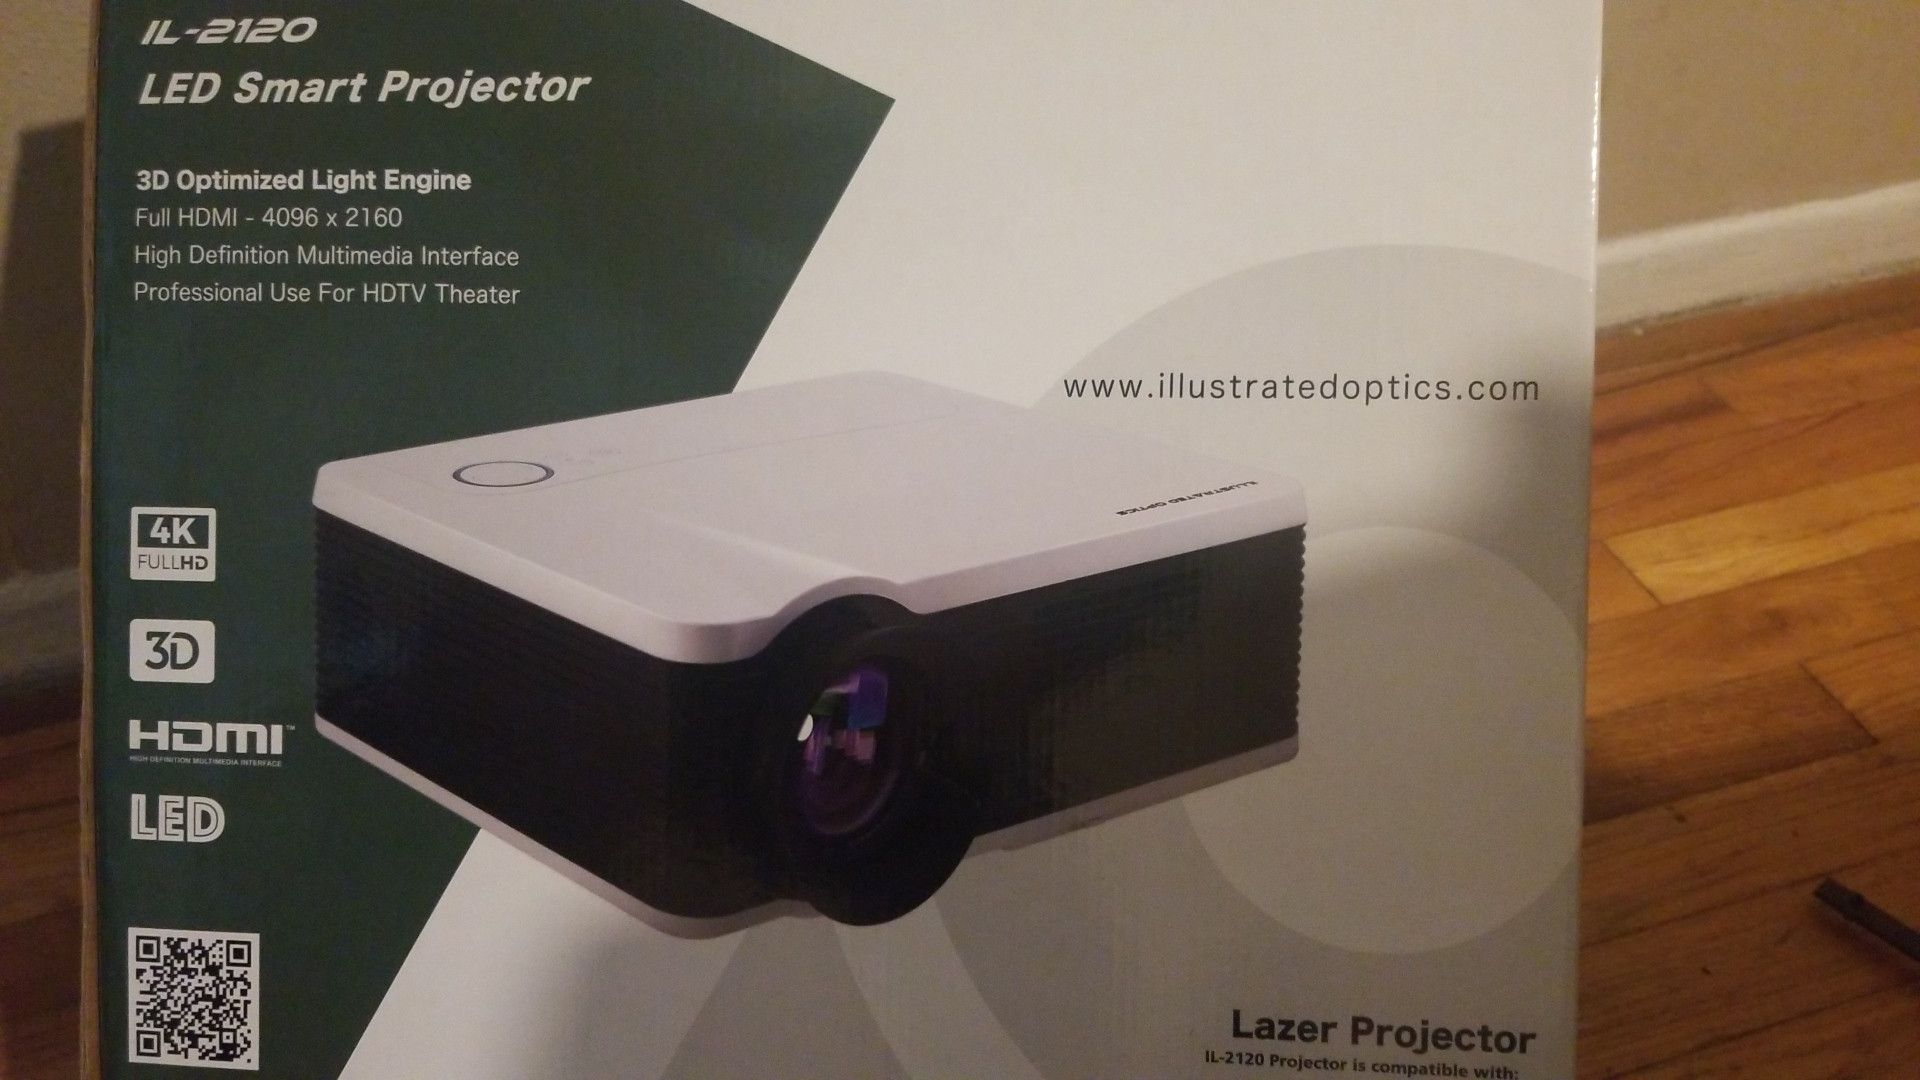 LED Smart Projector